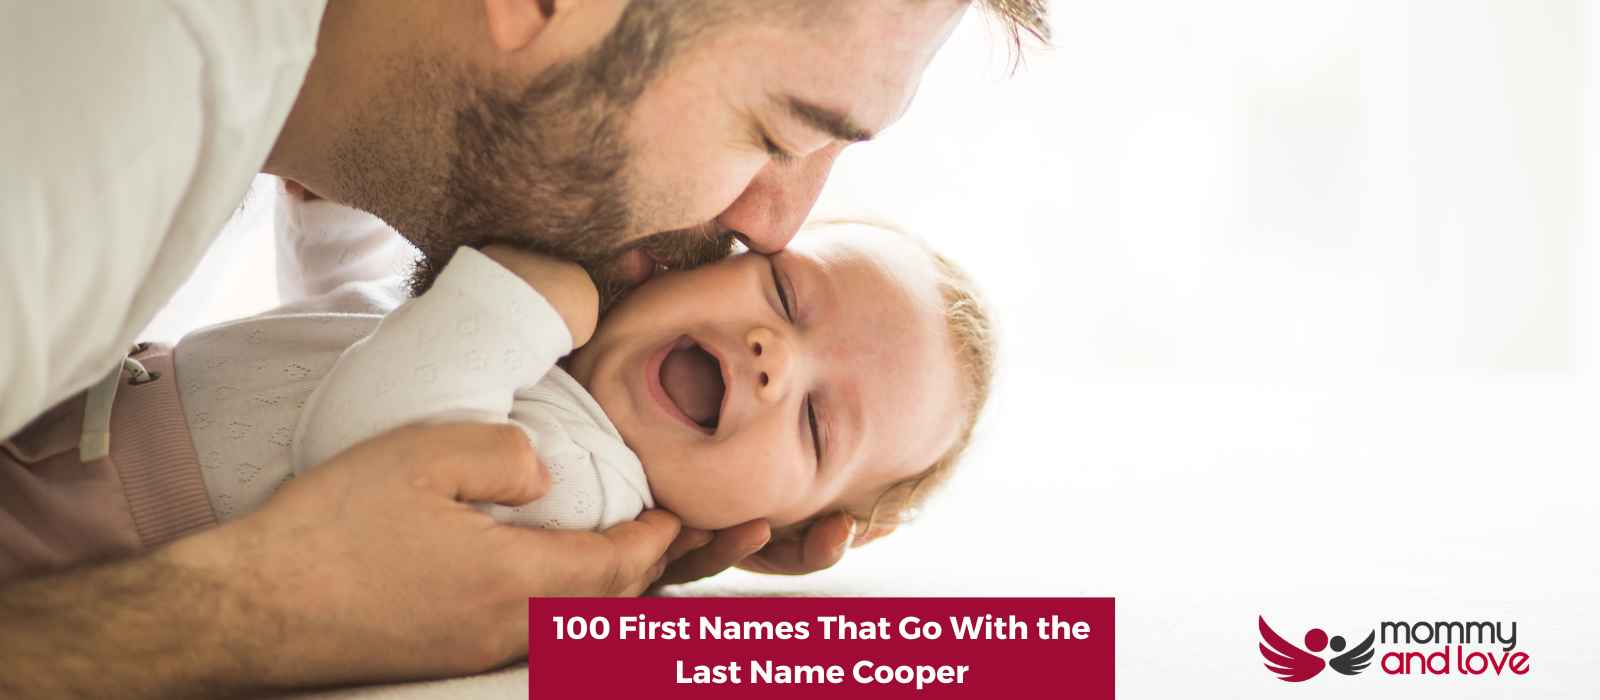 100 First Names That Go With the Last Name Cooper